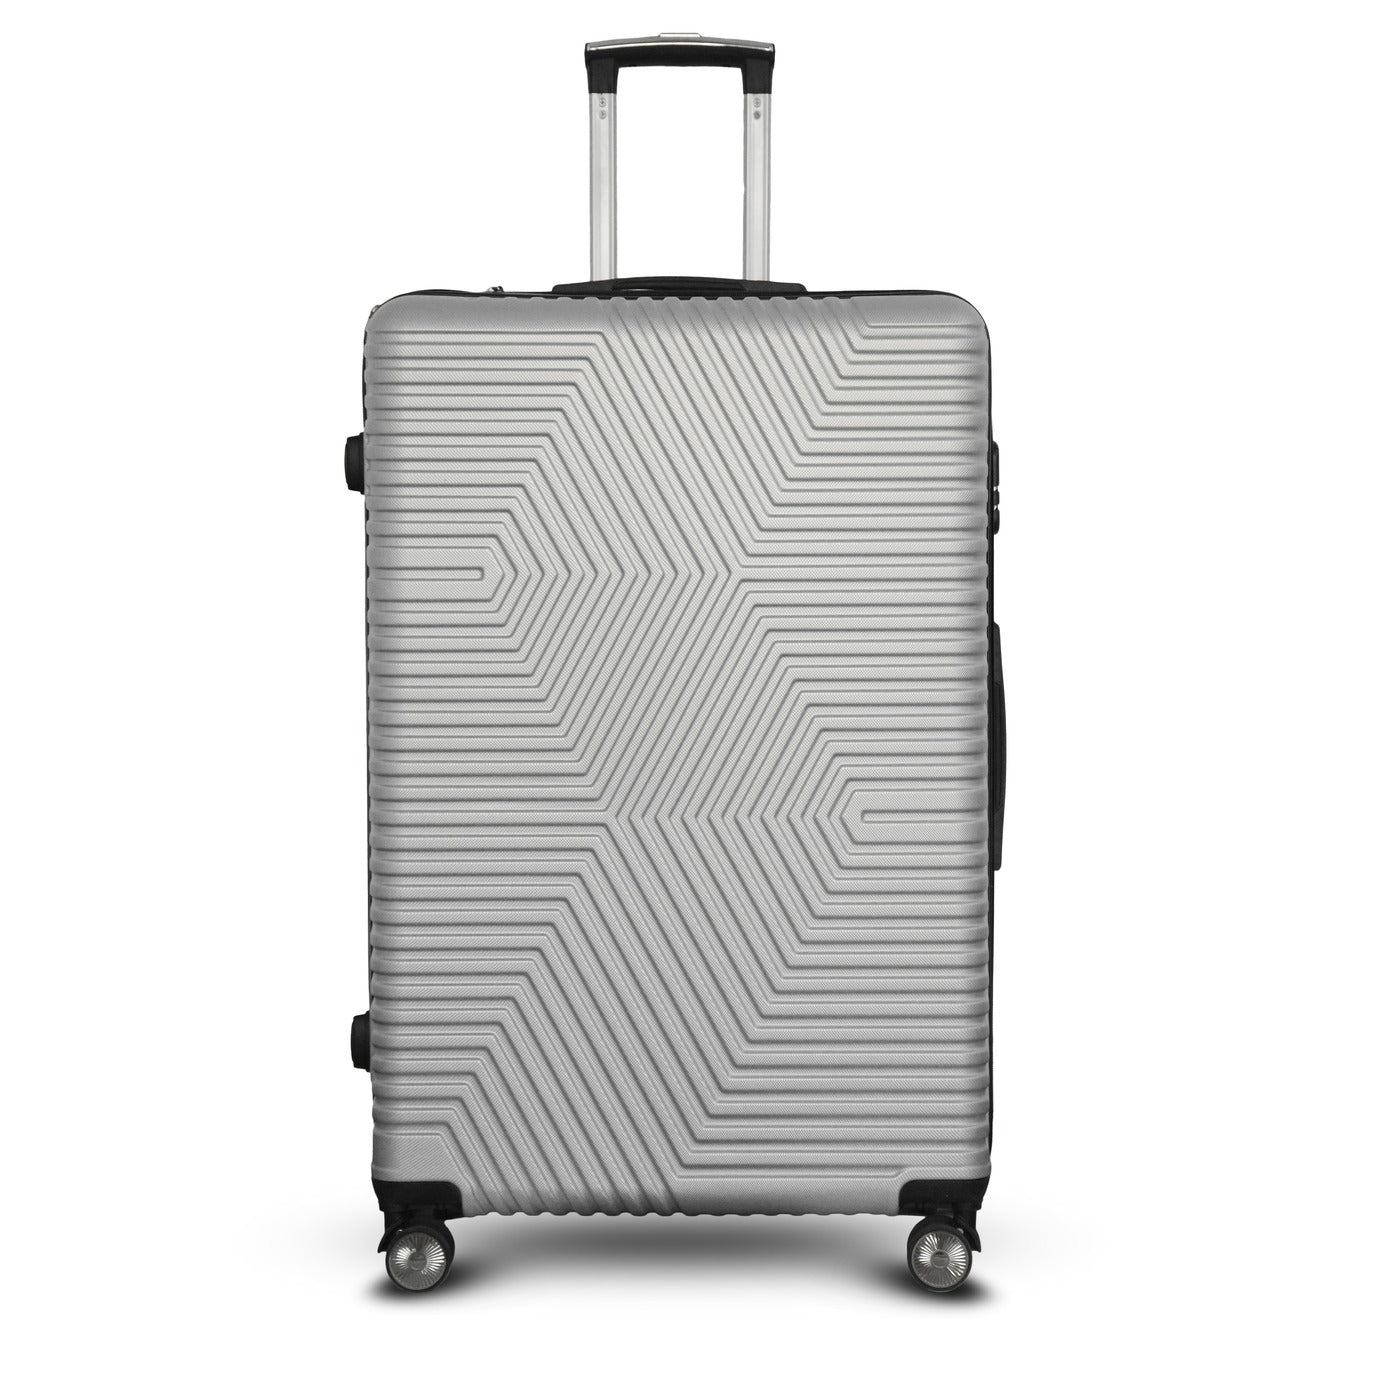 3 Piece Set 20" 24" 28 Inches Silver Zig Zag ABS Lightweight Luggage Bag with Double Spinner Wheel